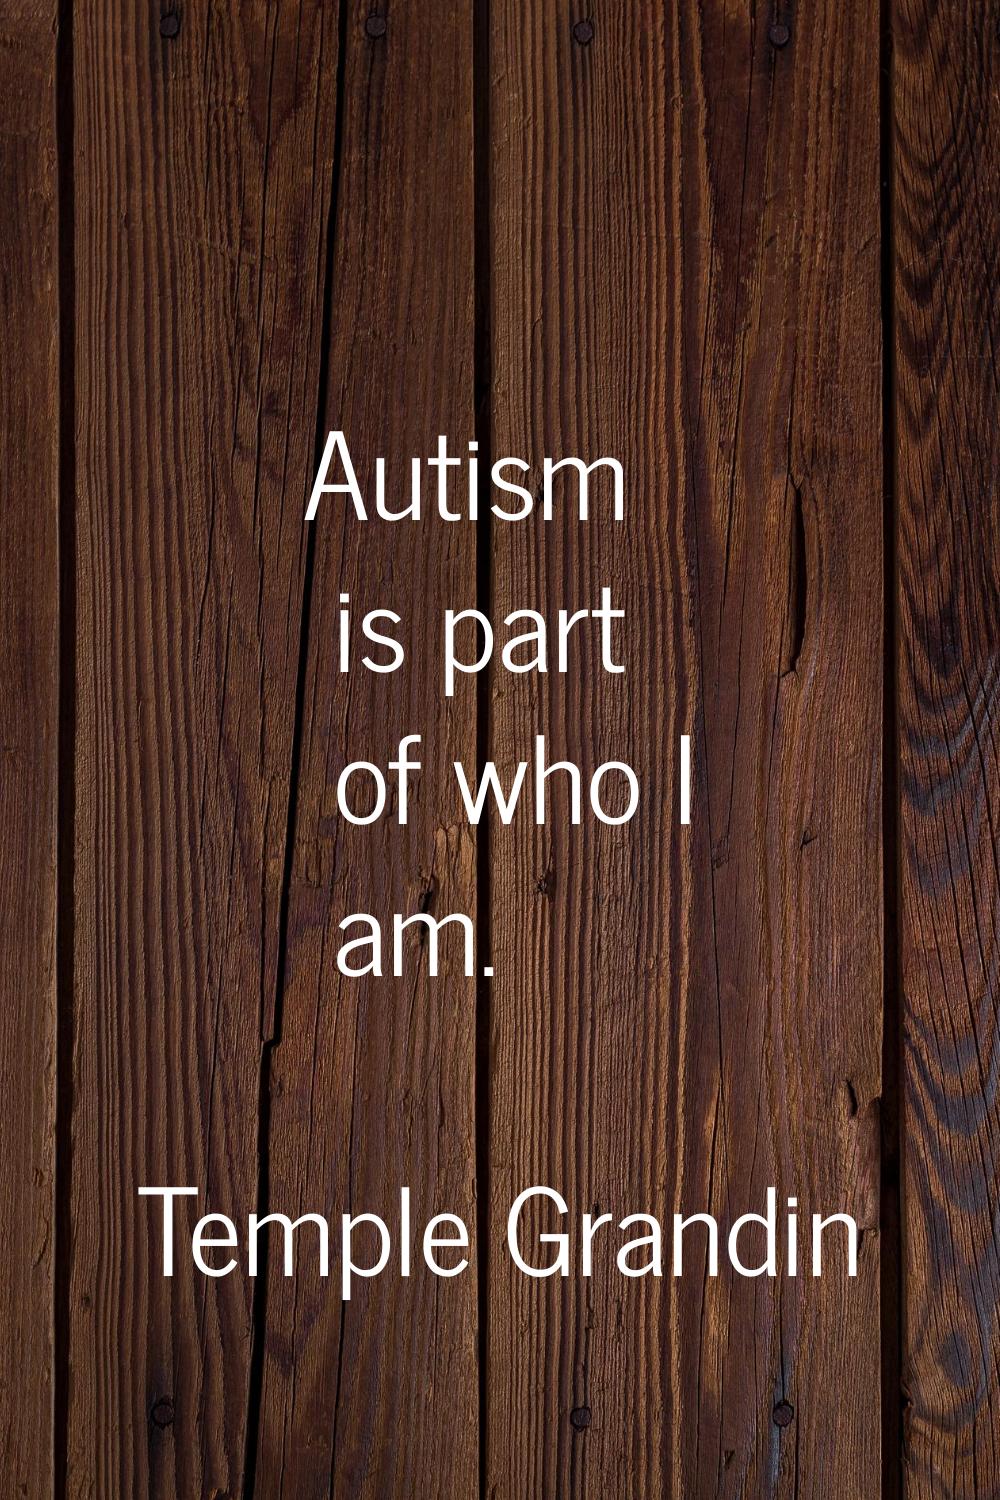 Autism is part of who I am.